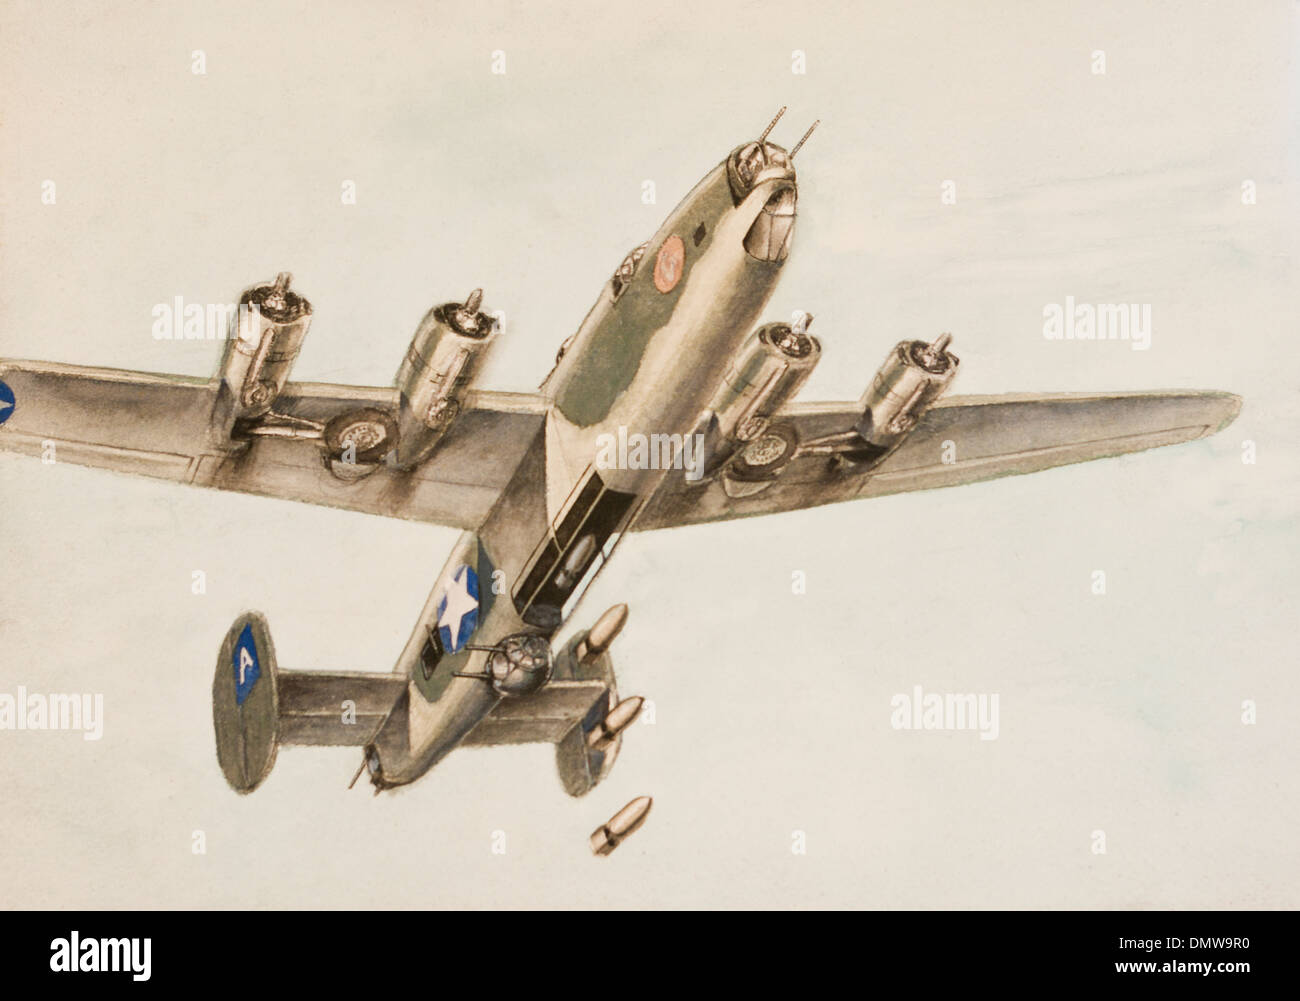 American World War 2 Flying Fortress Bomber Watercolour Painting Stock Photo